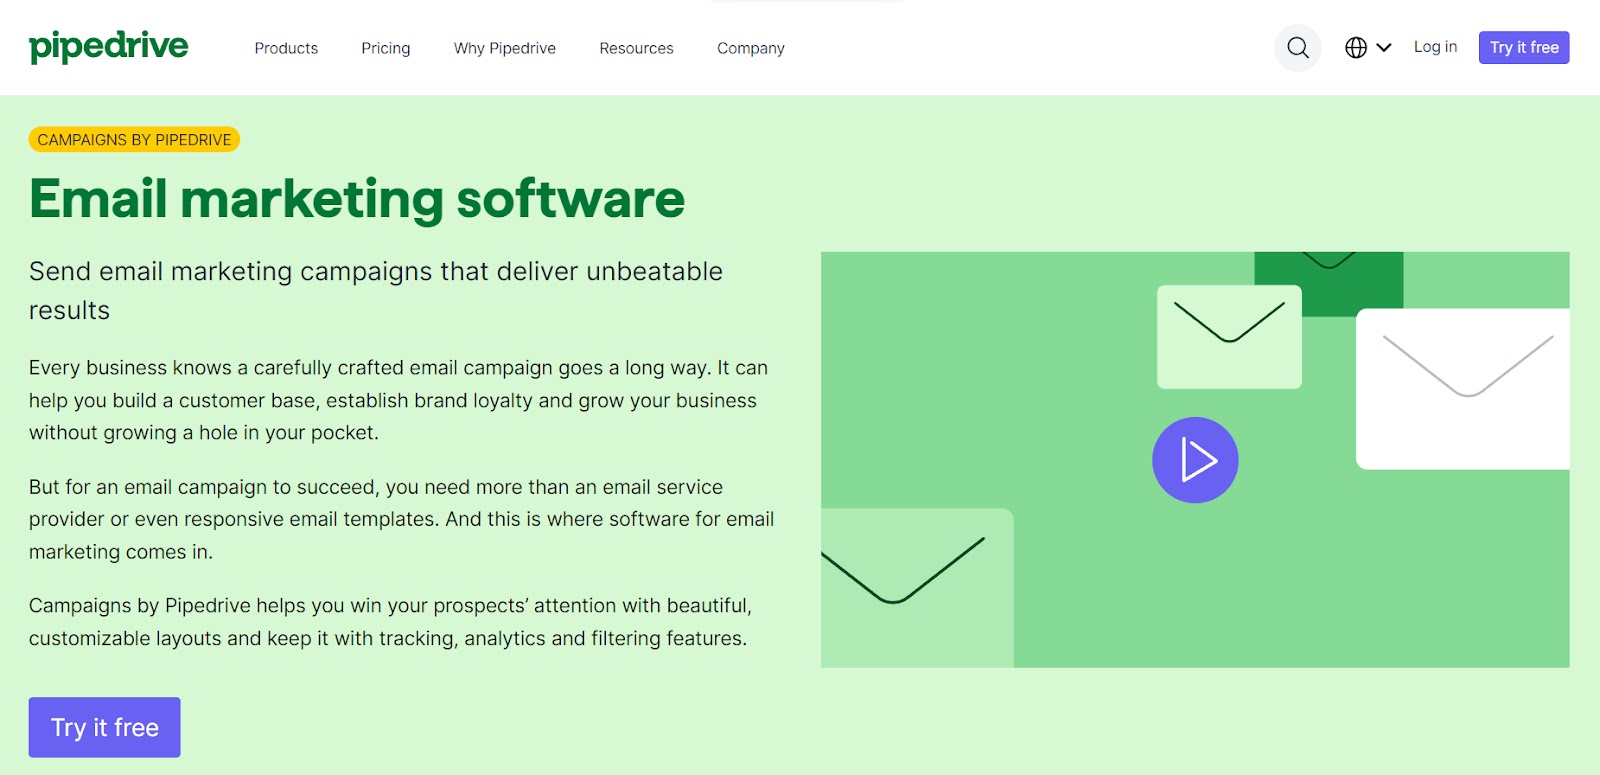 "Email marketing software" landing page on Pipedrive website